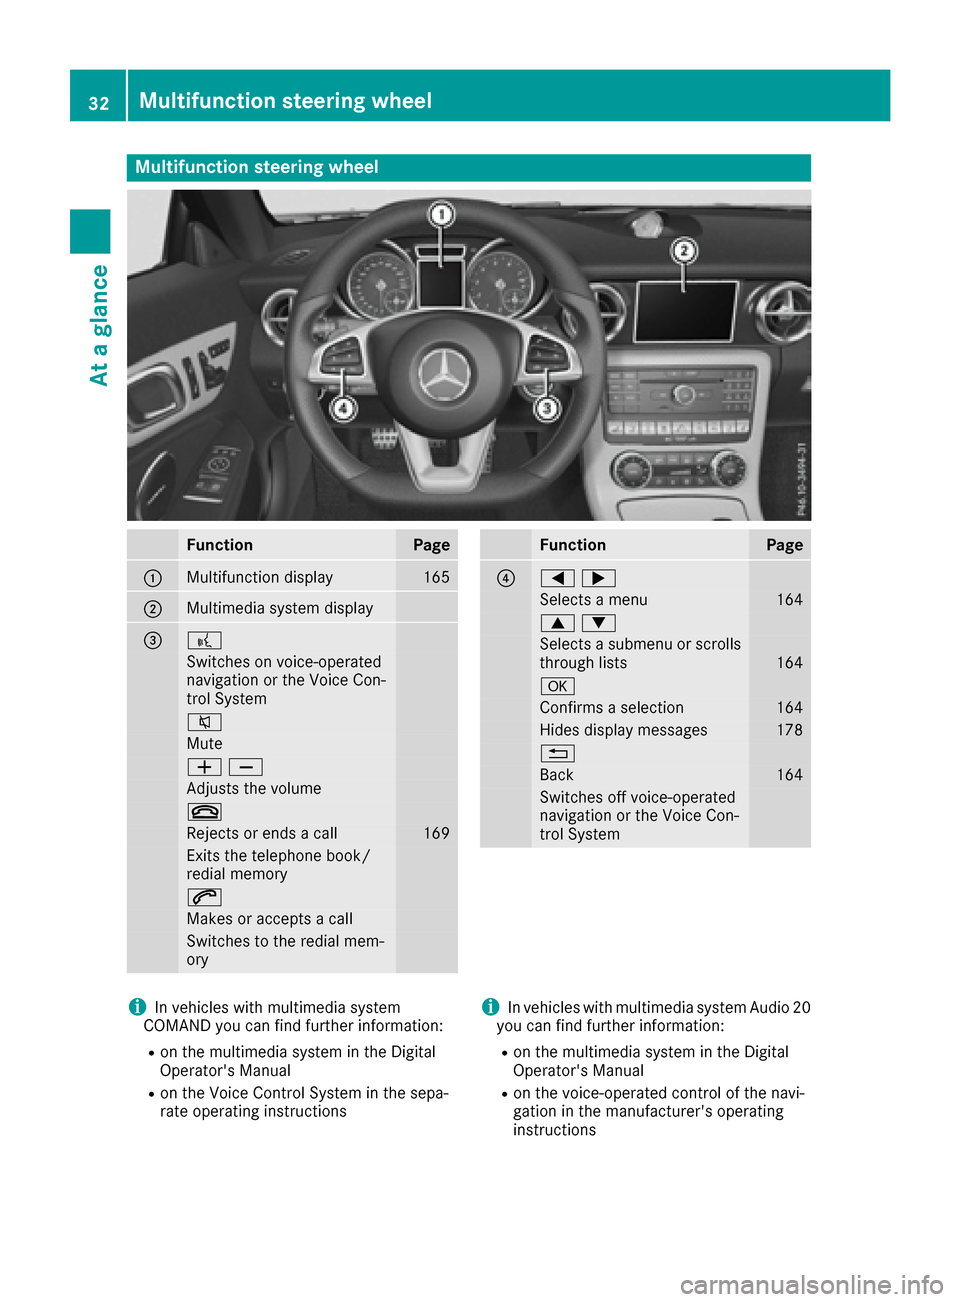 MERCEDES-BENZ SLC-Class 2017 R172 Owners Guide Multifunction steering wheel
FunctionPage
:Multifunction display165
;Multimediasystem display
=?
Switches on voice-operated
navigation or the Voice Con-
trol System
8
Mute
WX
Adjusts the volume
~
Reje